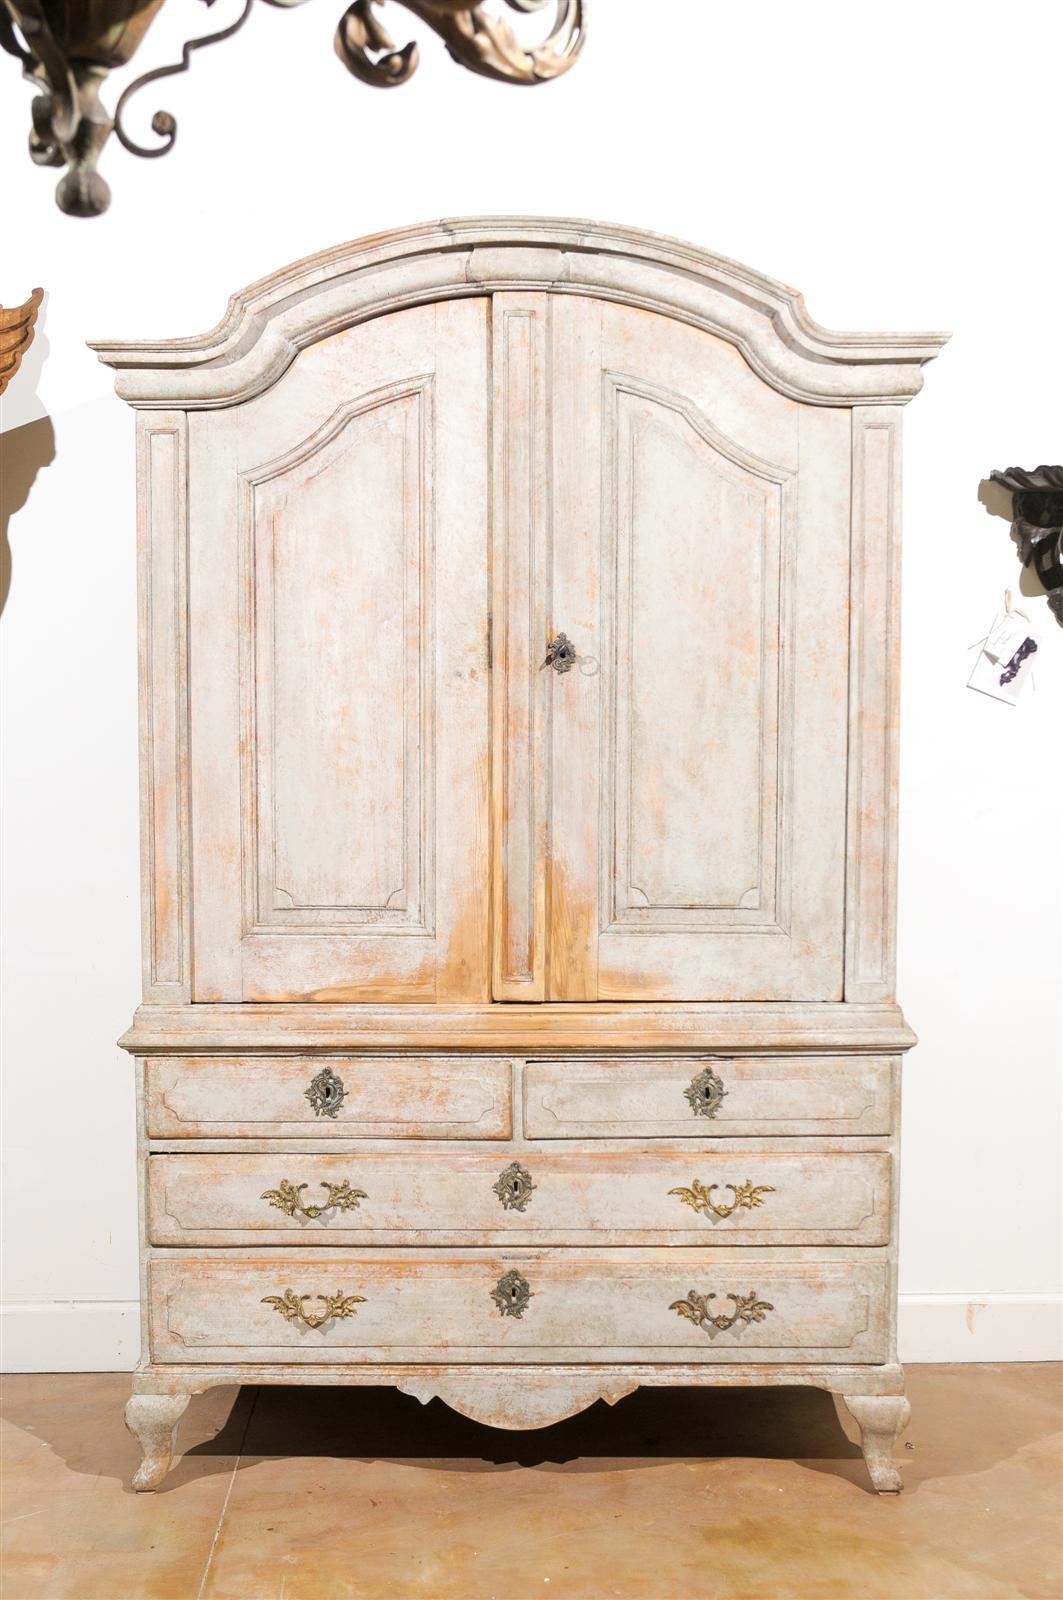 A Swedish Rococo period painted wood cabinet with original paint, bonnet pediment and double doors over four drawers from the mid-18th century. This Swedish painted cabinet features a bonnet type pediment, typical of the Rococo era, surmounting a